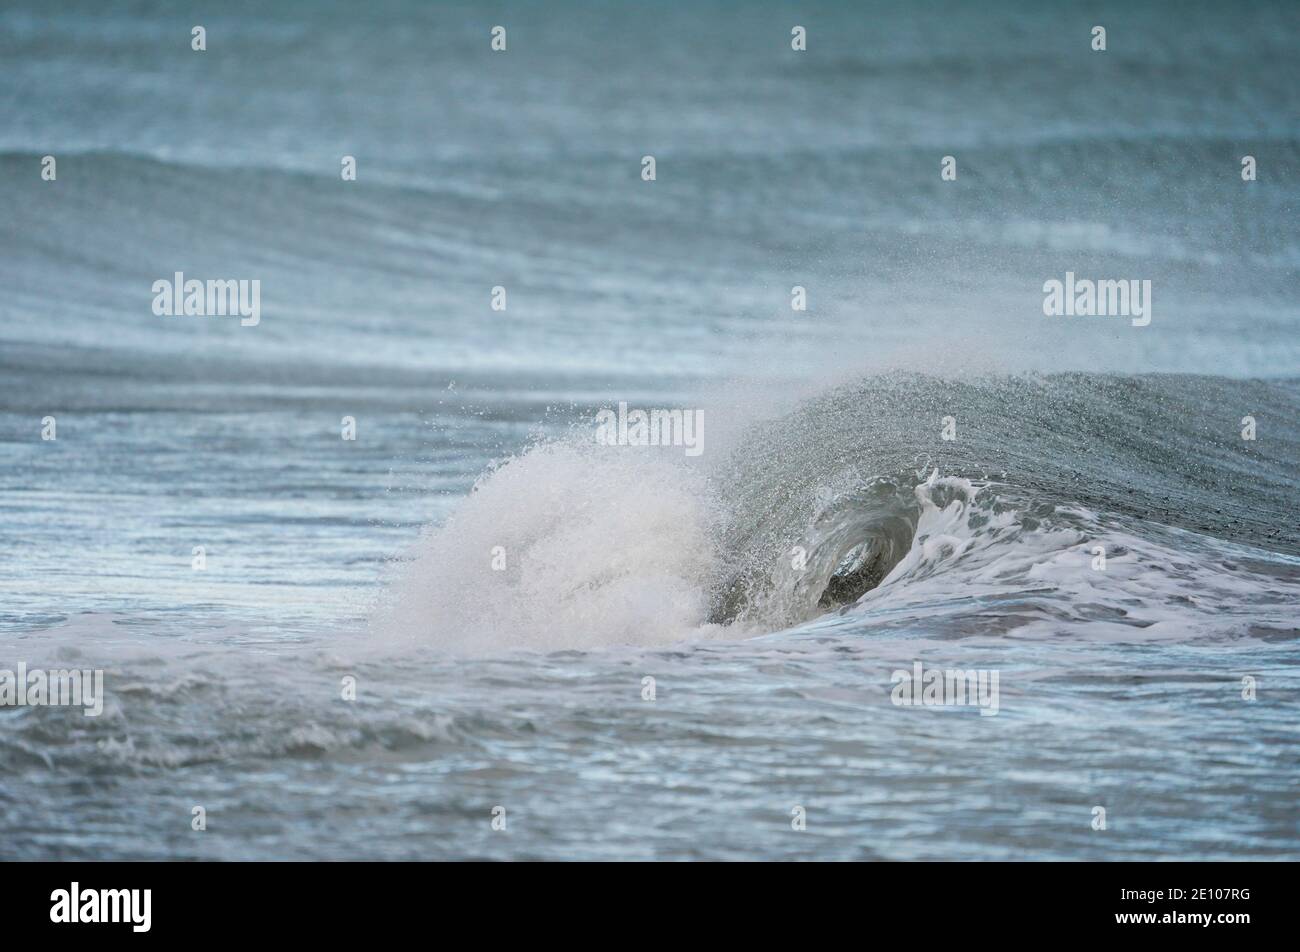 Breaking waves on coast in Spain, Andalusia, Spain. Stock Photo